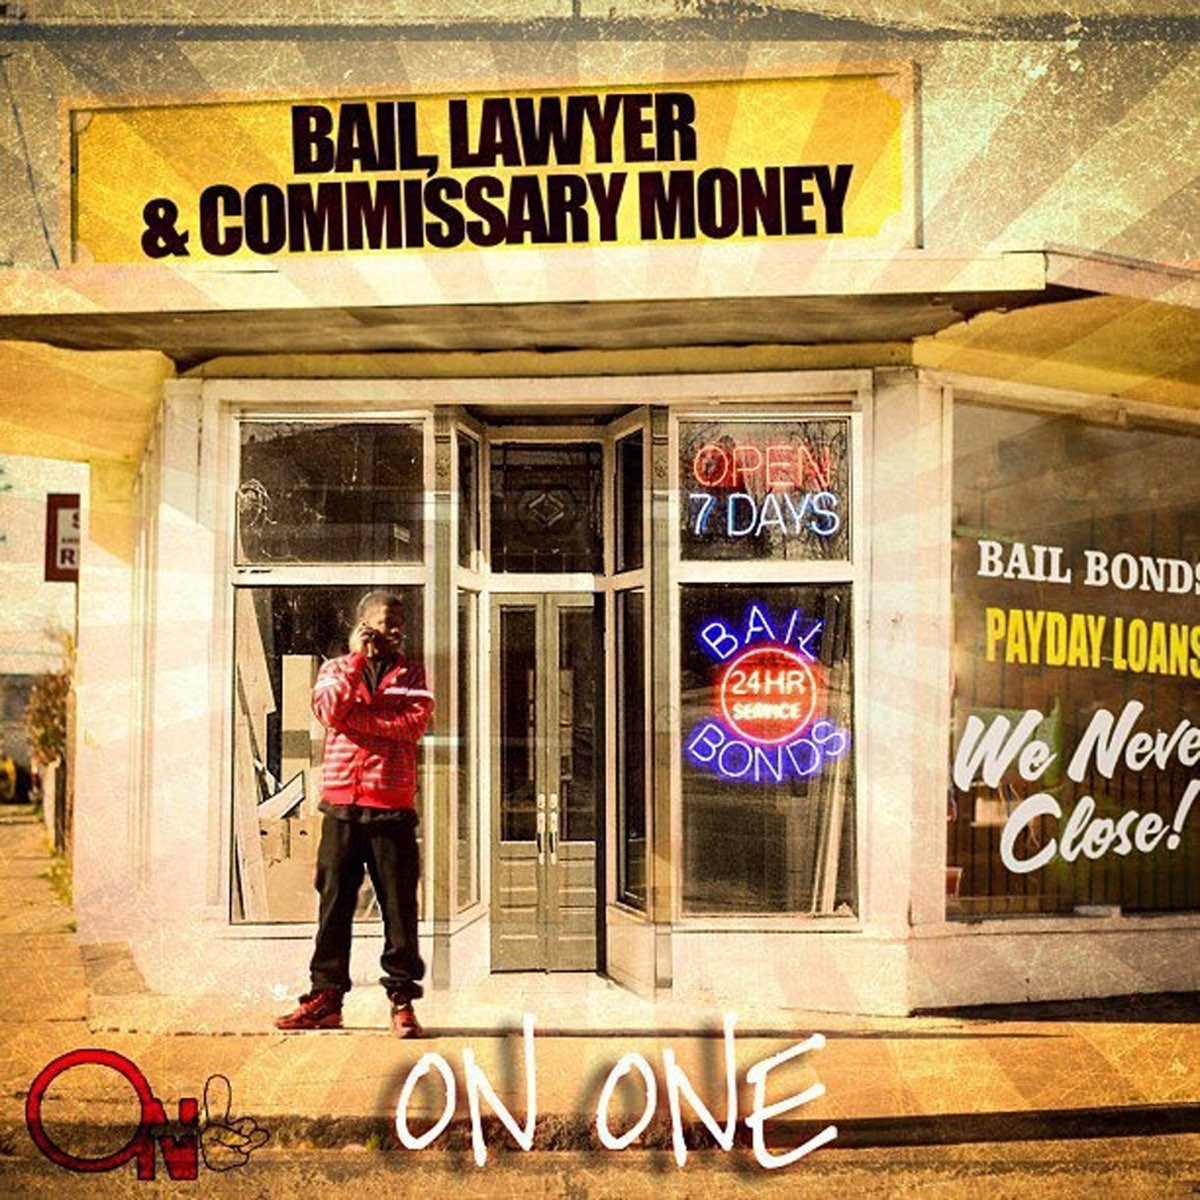 On1 - Bail, Lawyer & Commissary Money